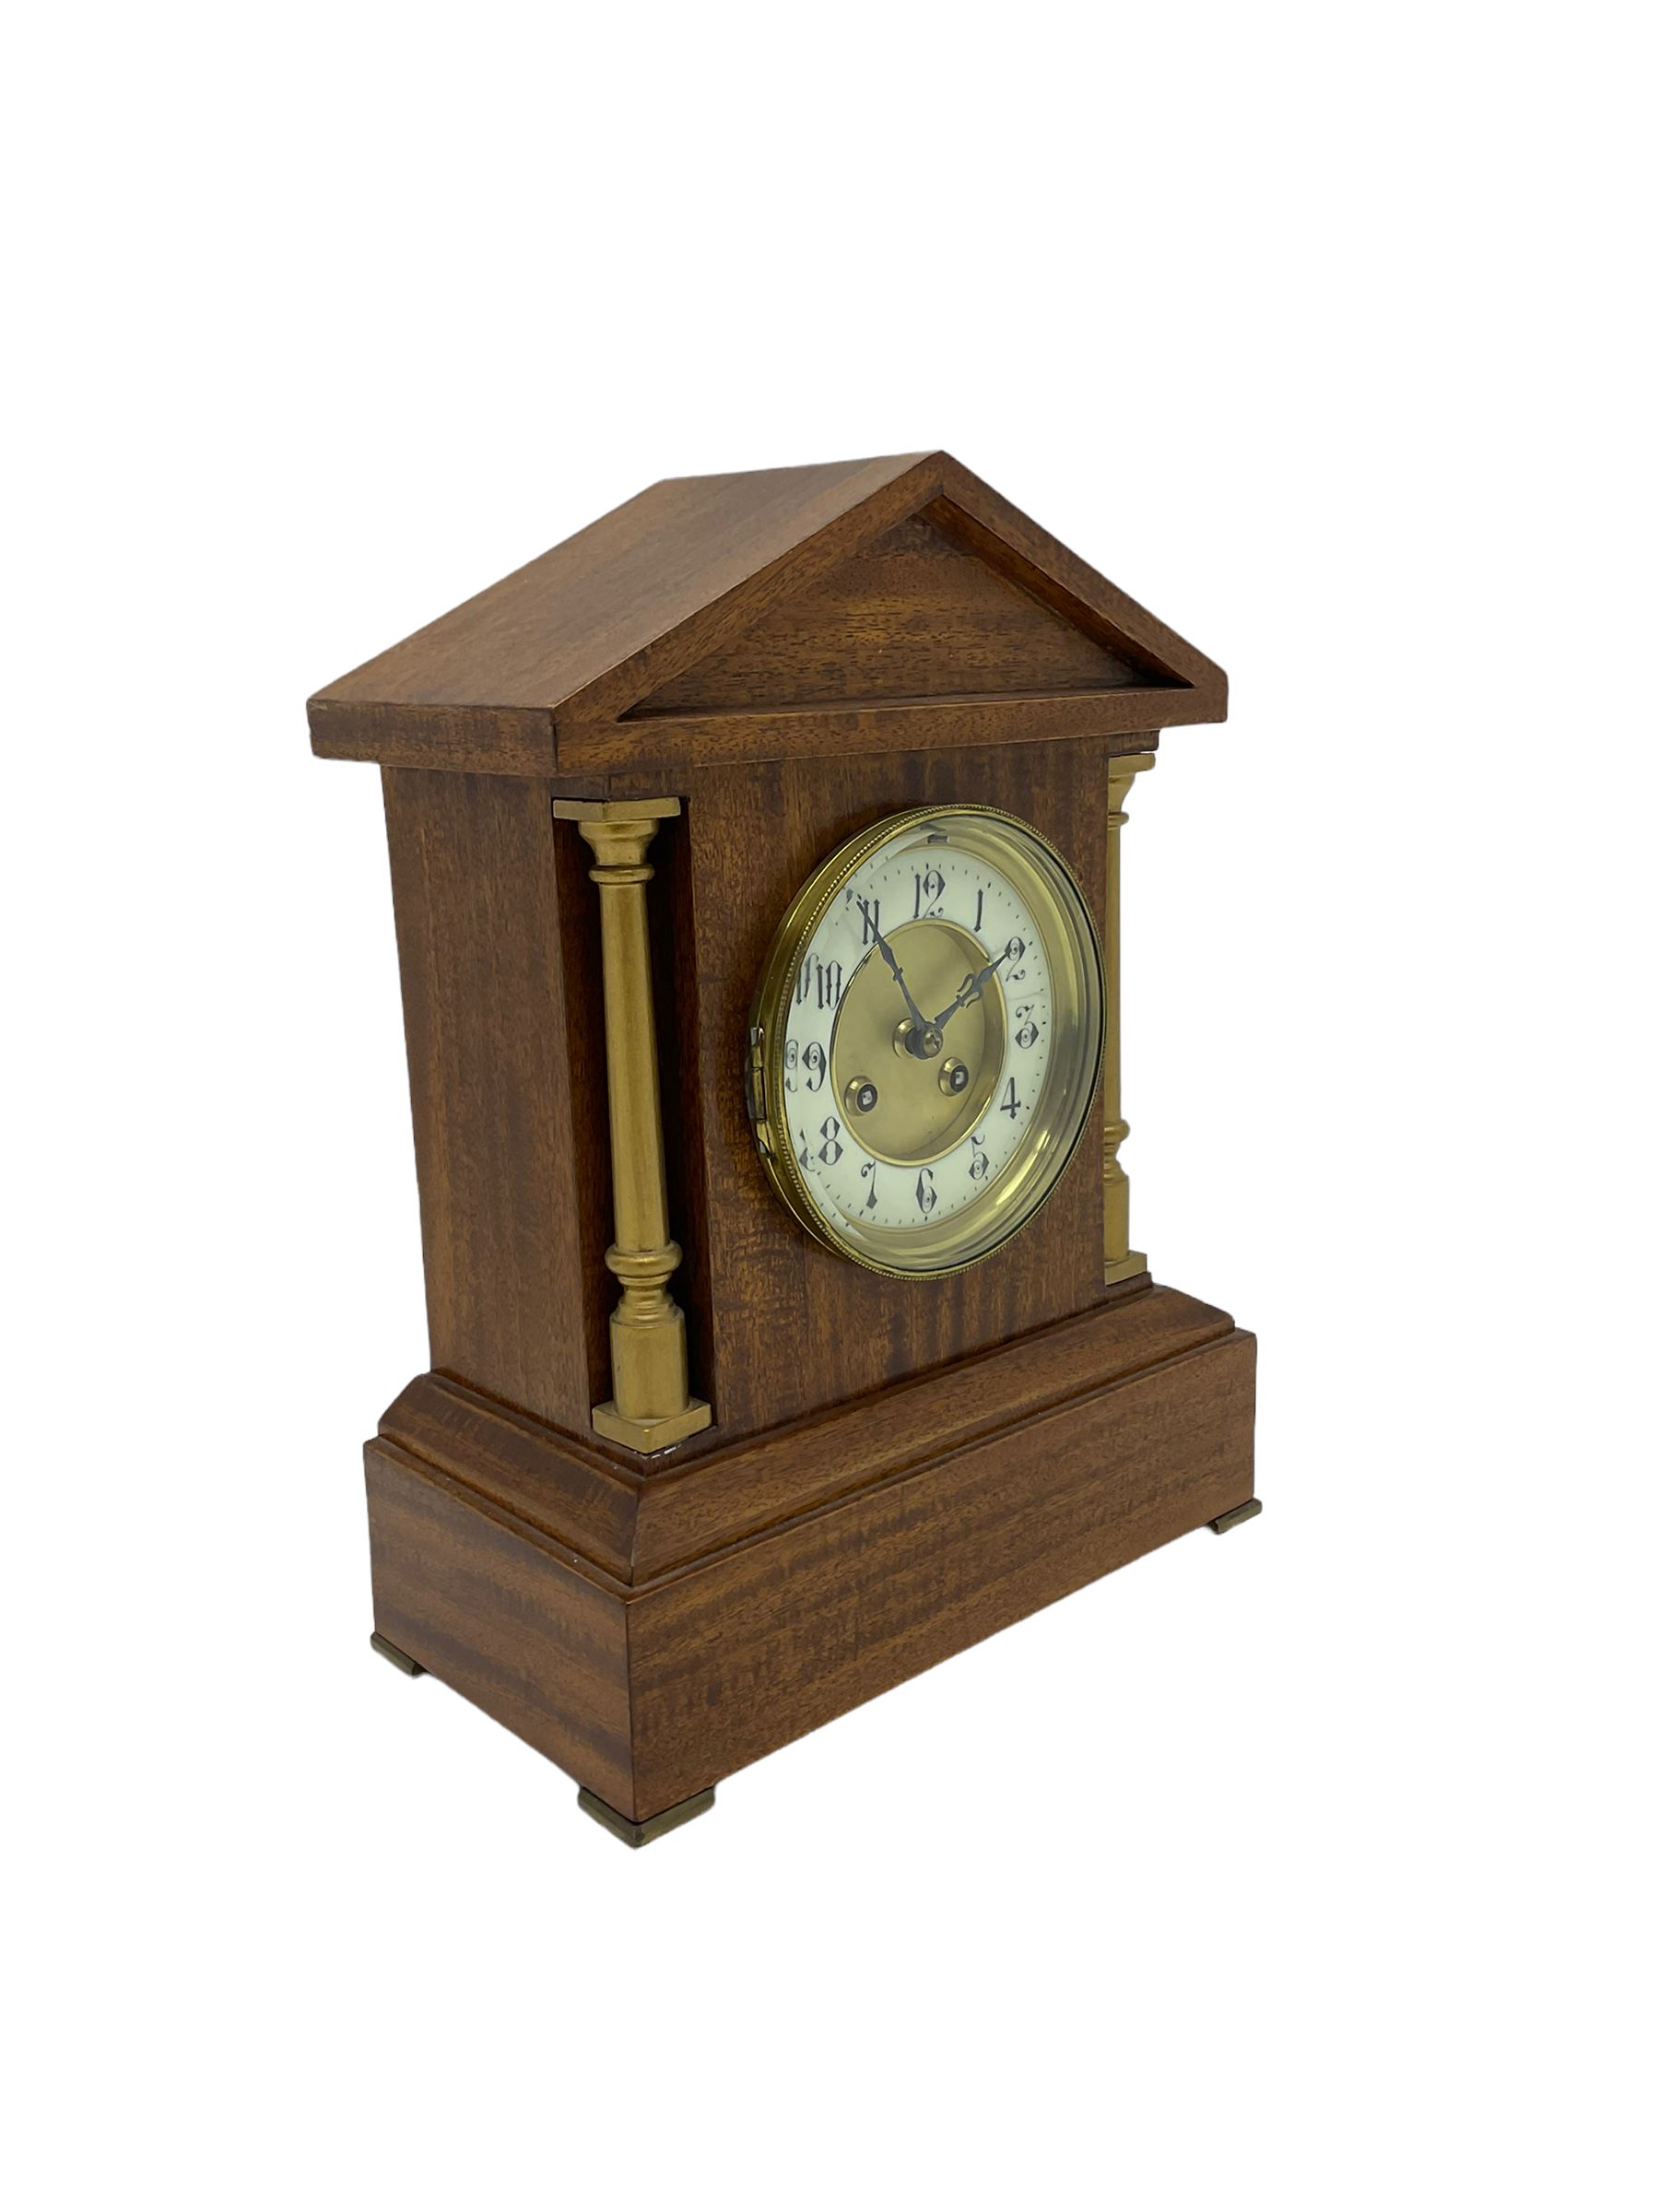 Mahogany cased mantle clock in a bespoke 20th century case with an architectural pediment and recess - Image 2 of 3